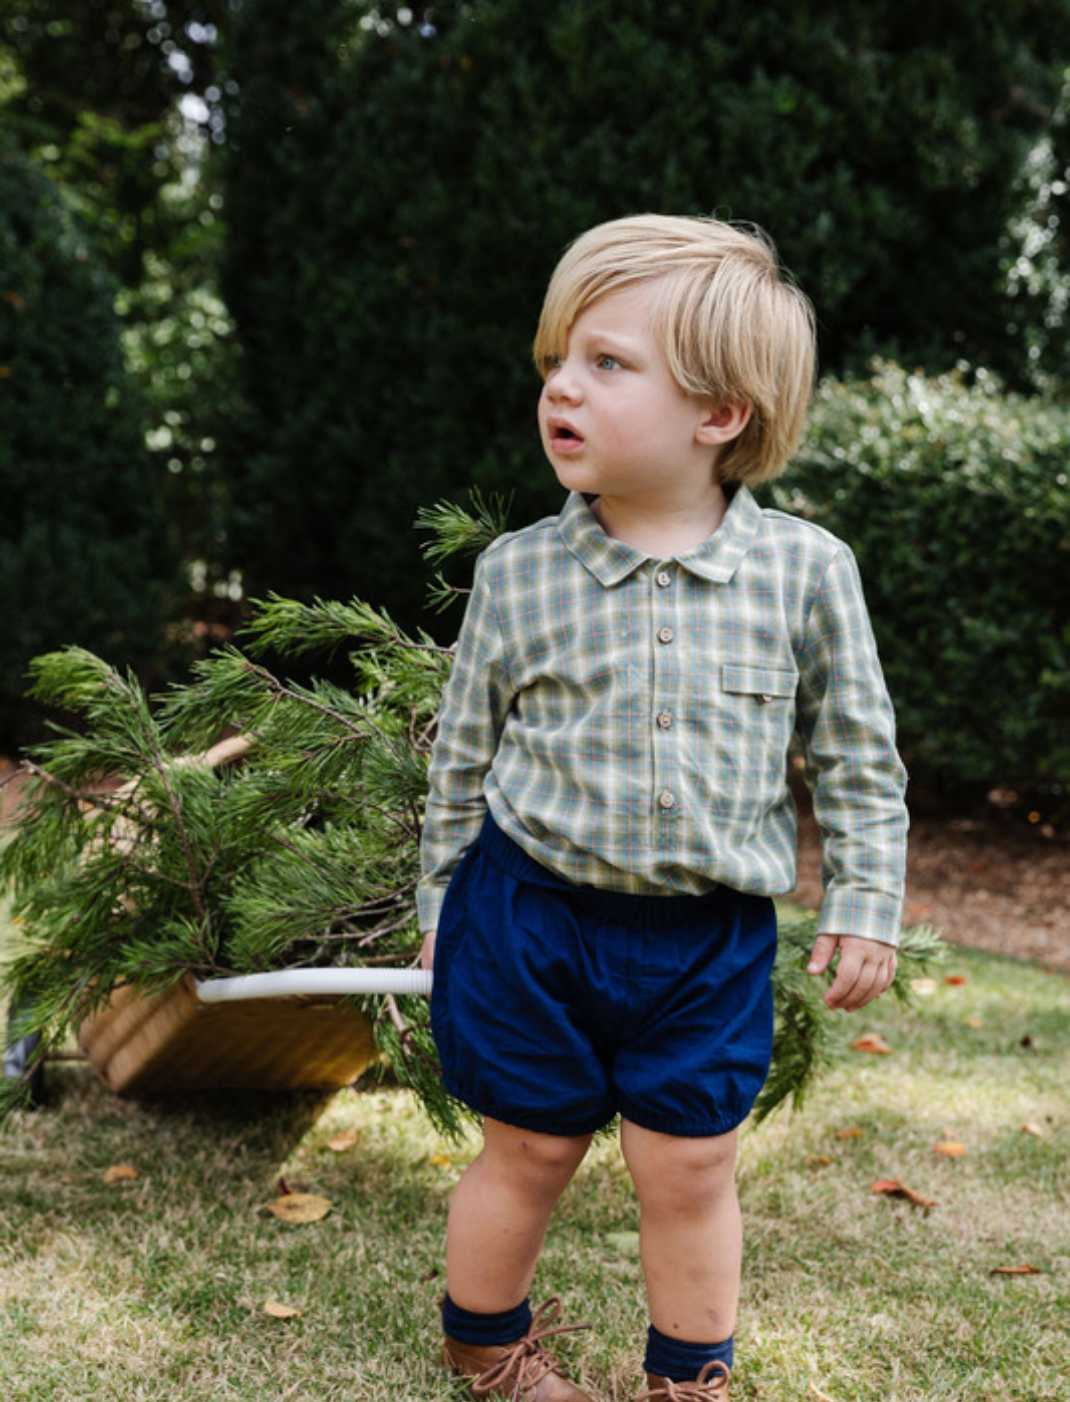 Little boy wearing a long sleeve checkered shirt and blue shorts pulling a basket with pine branches outside.